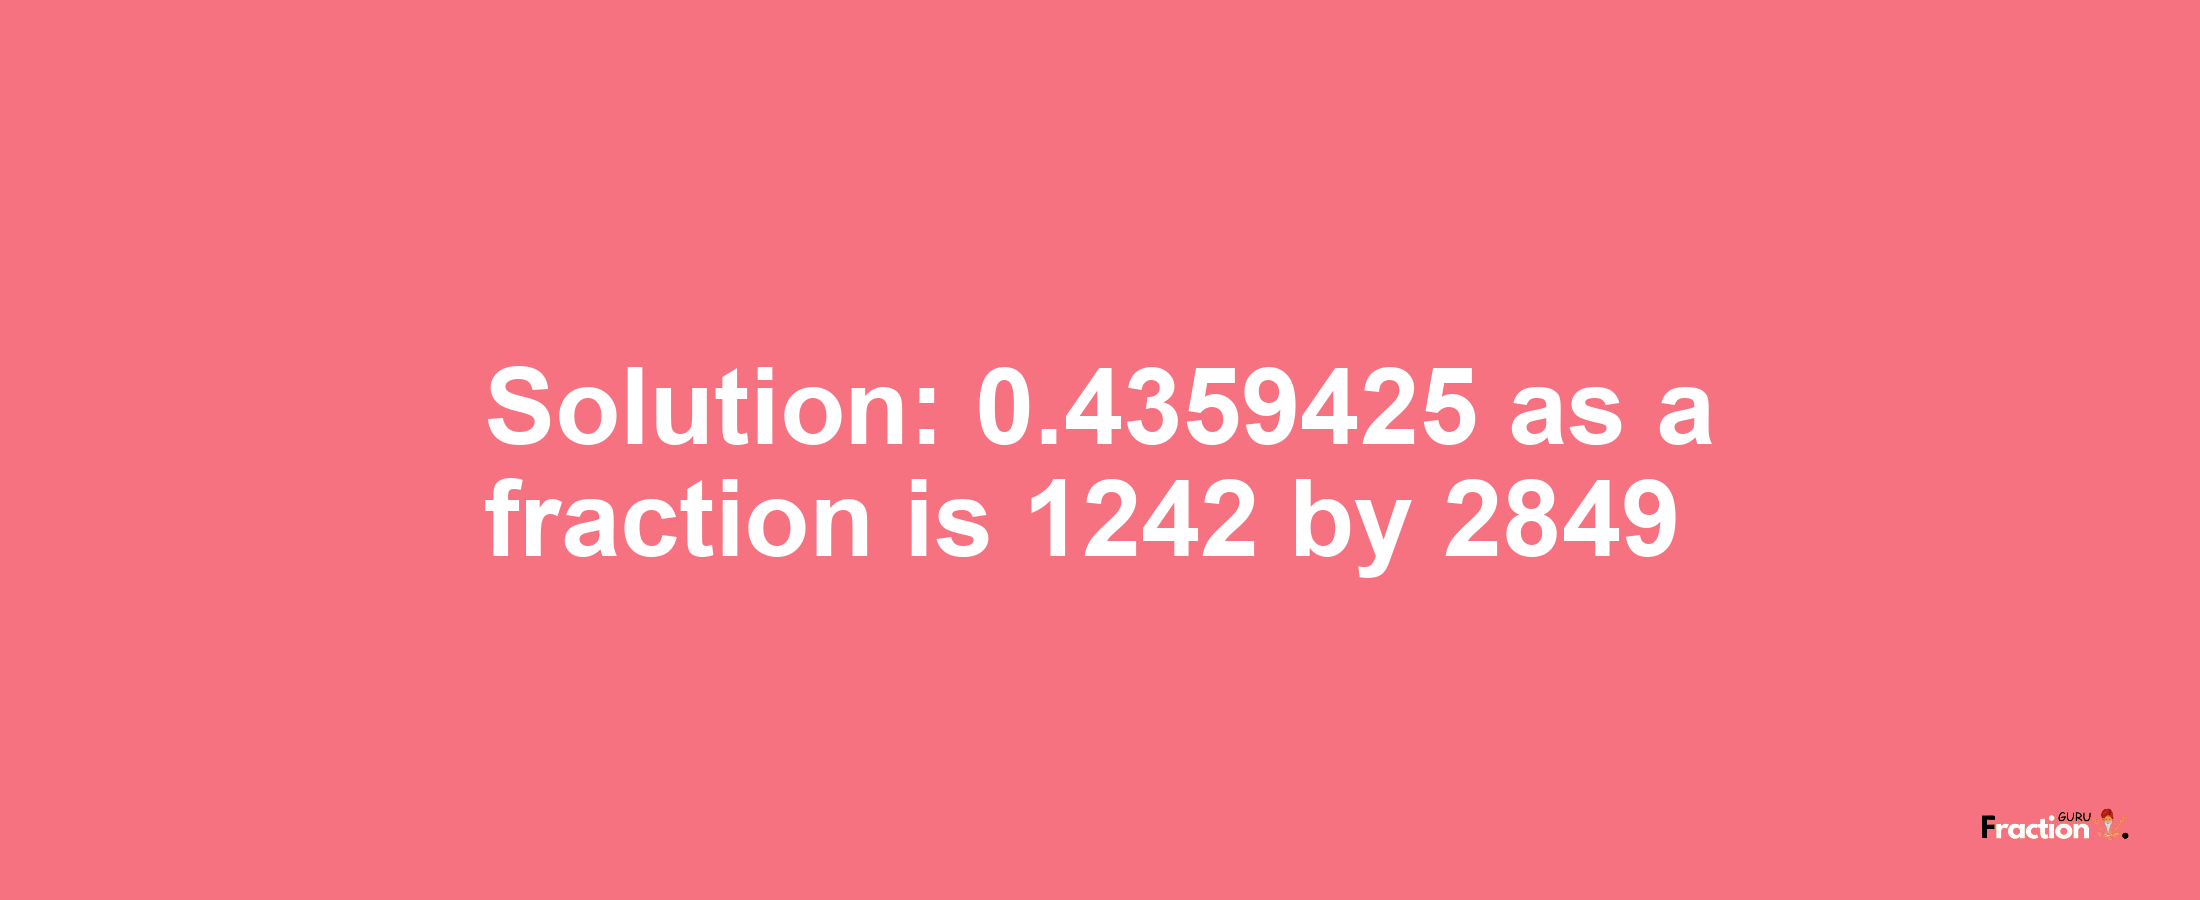 Solution:0.4359425 as a fraction is 1242/2849